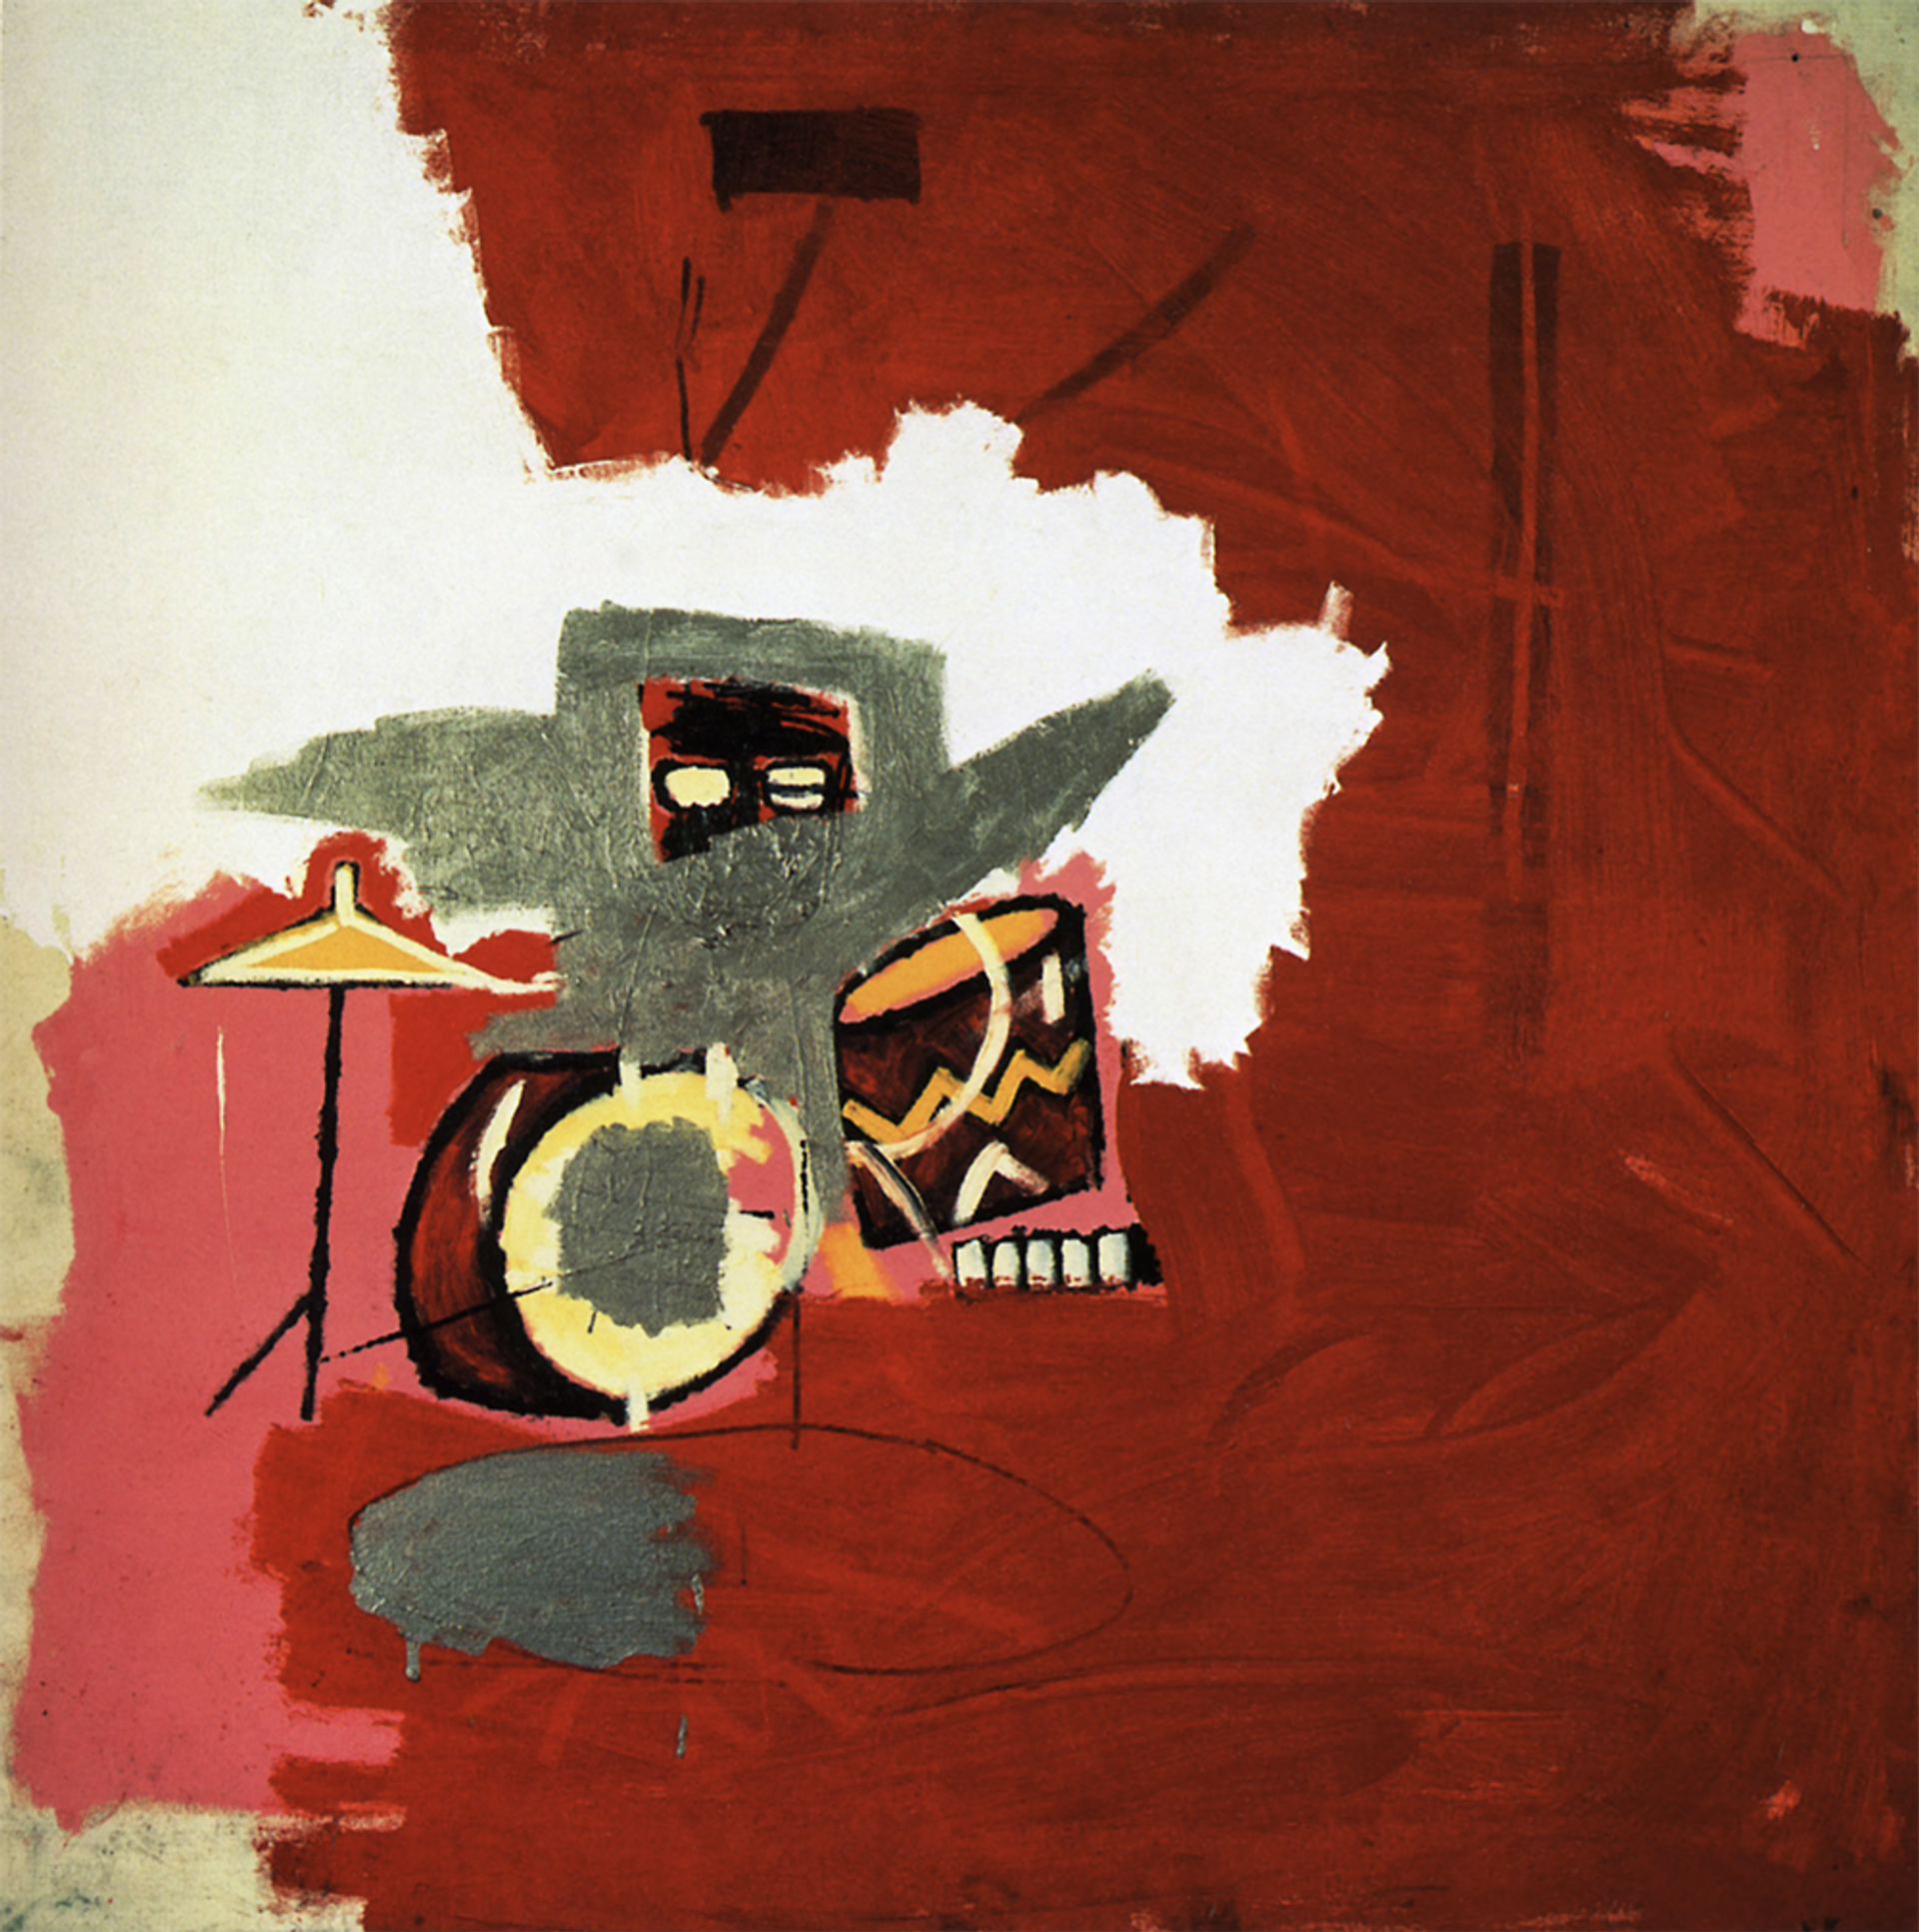 Jean-Michel Basquiat’s Max Roach. An abstract painting depicting percussionist Max Roach sitting at his drums in front of a predominantly red background.